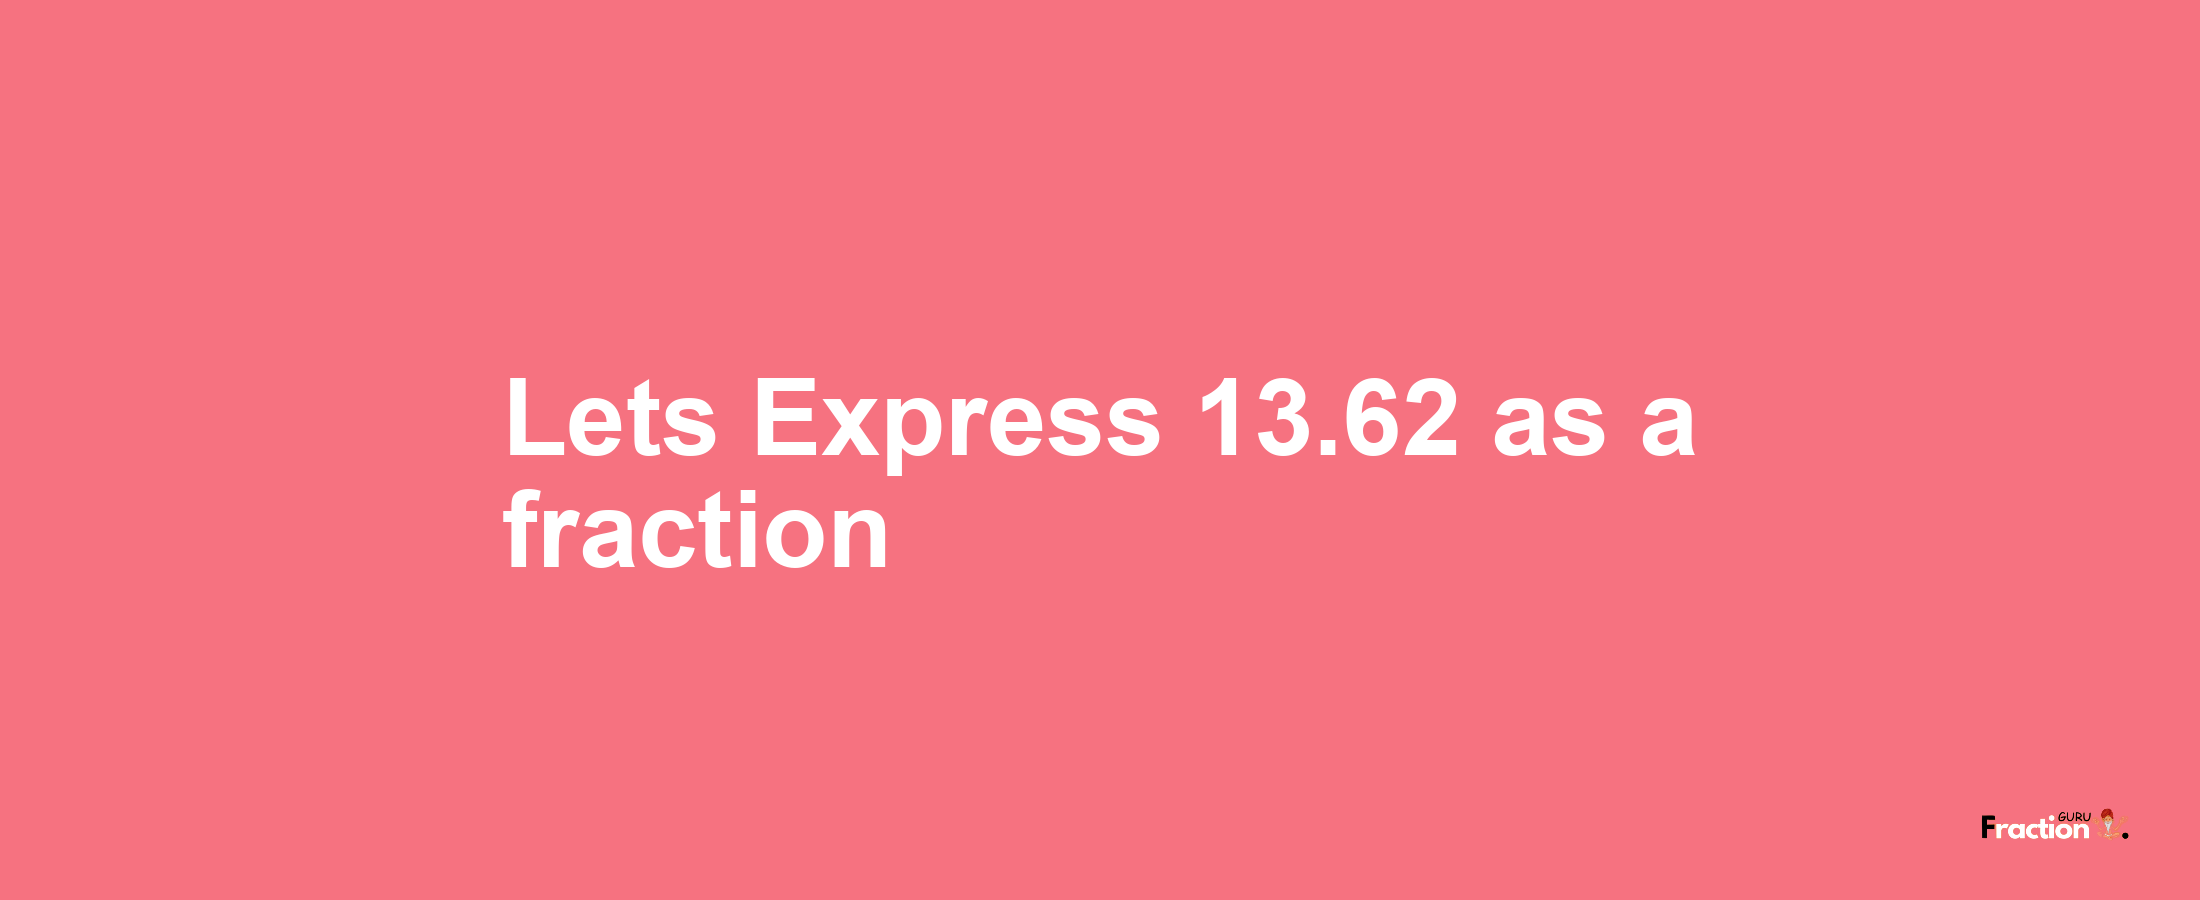 Lets Express 13.62 as afraction